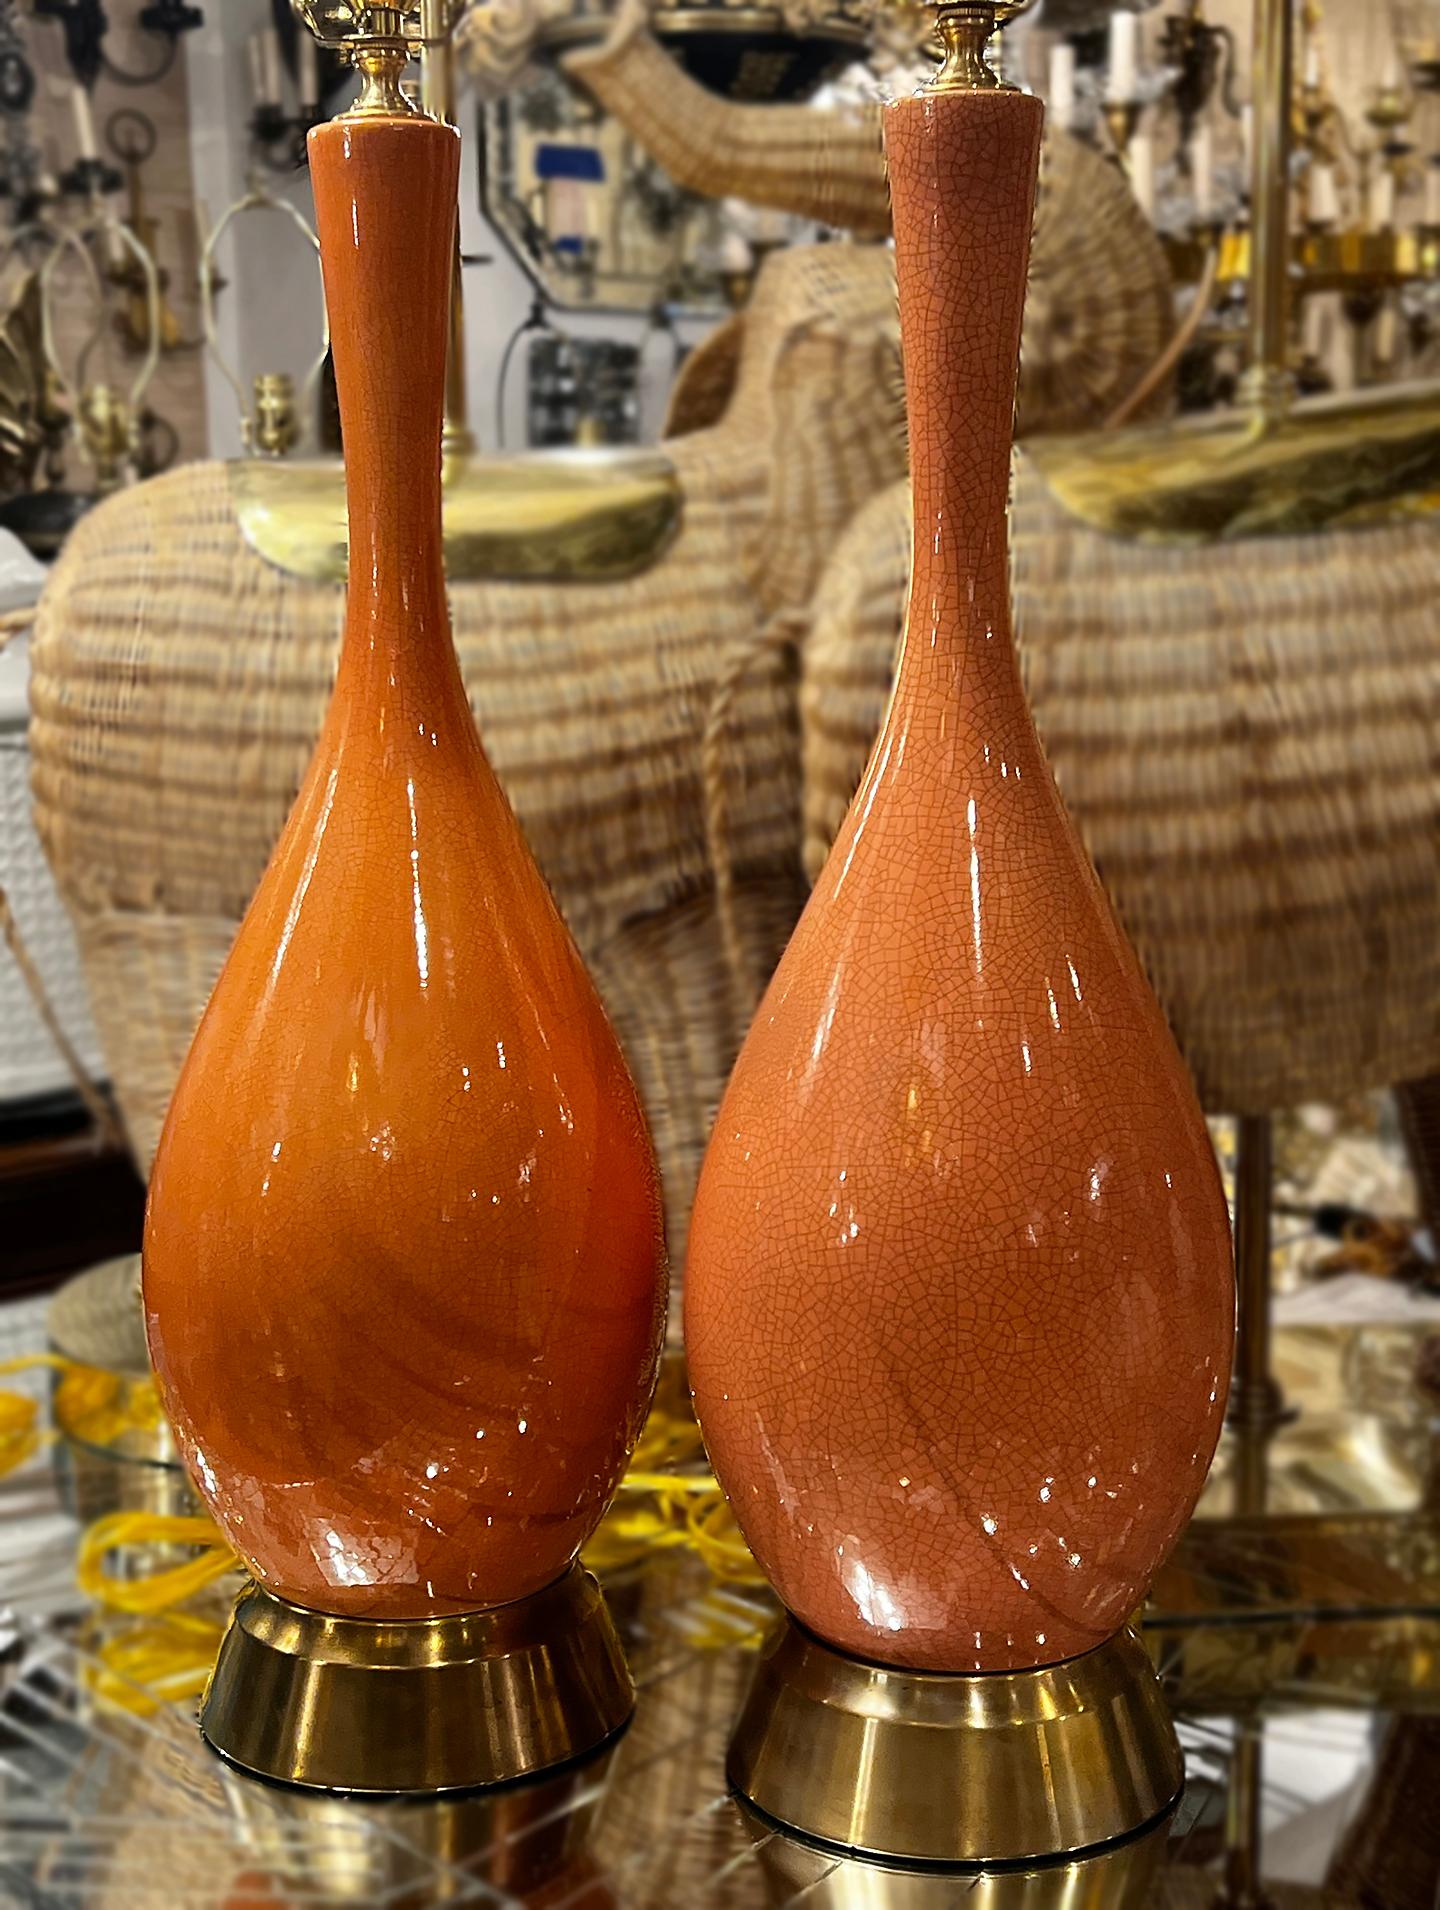 Pair of circa 1950's salmon-colored glazed porcelain lamps.

Measurements:
Height of body: 22